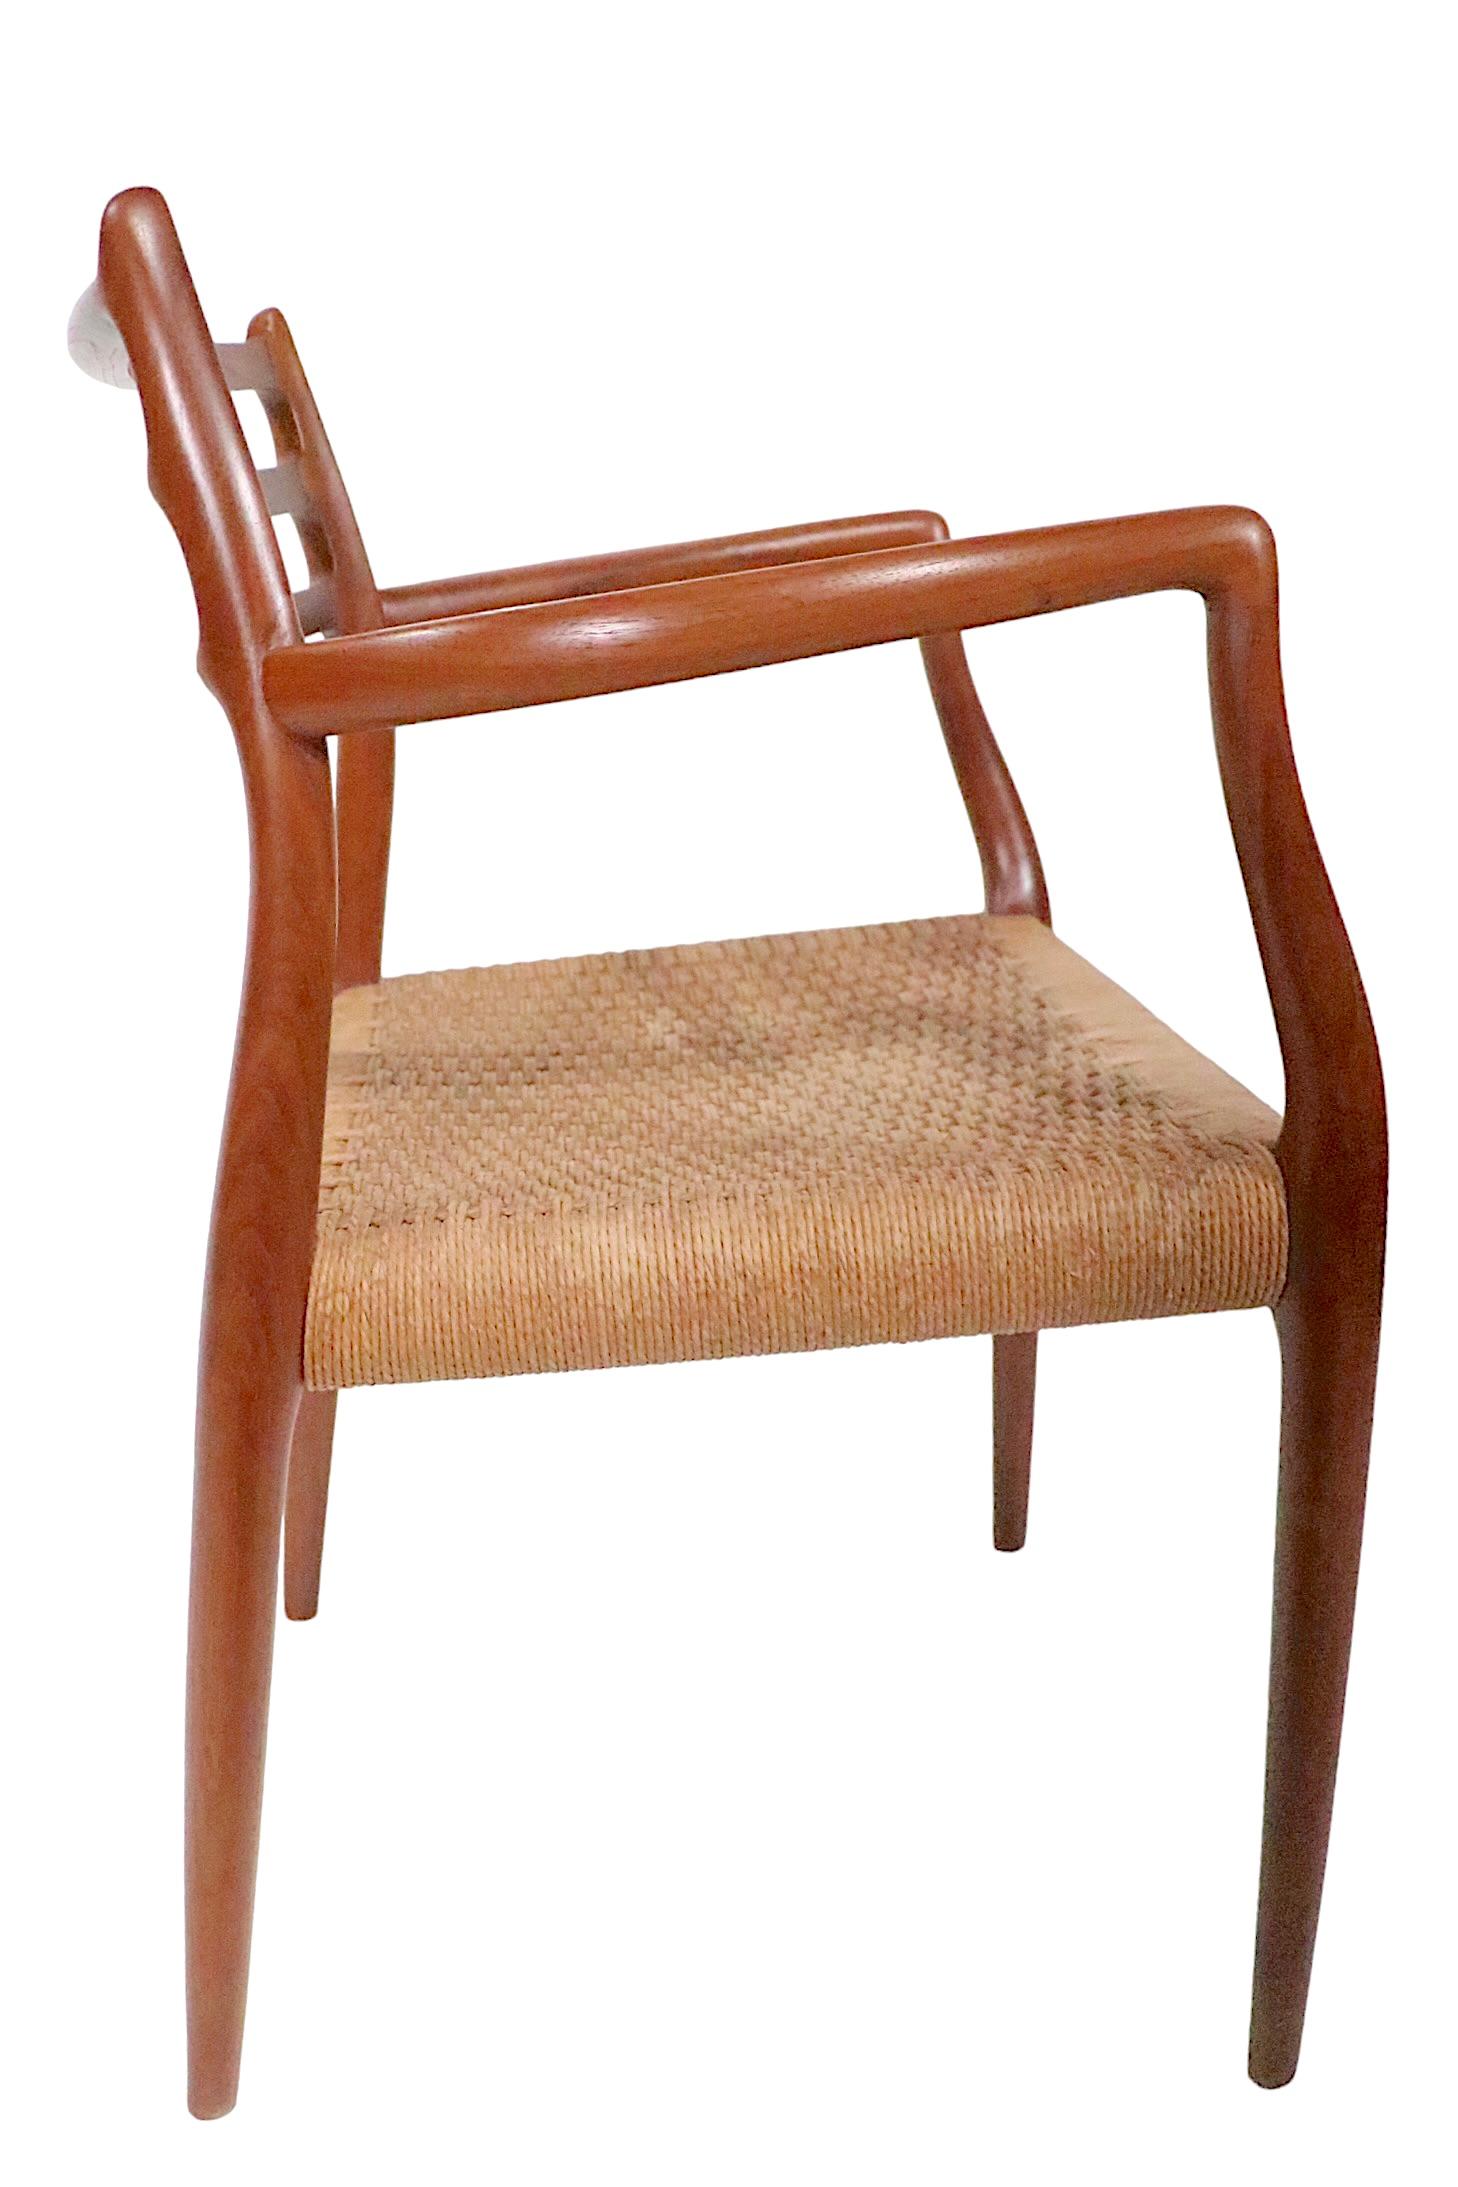 Danish Set of Eight Teak Dining Chairs by Neils Moller / J.L.Moller, circa 1960s For Sale 7